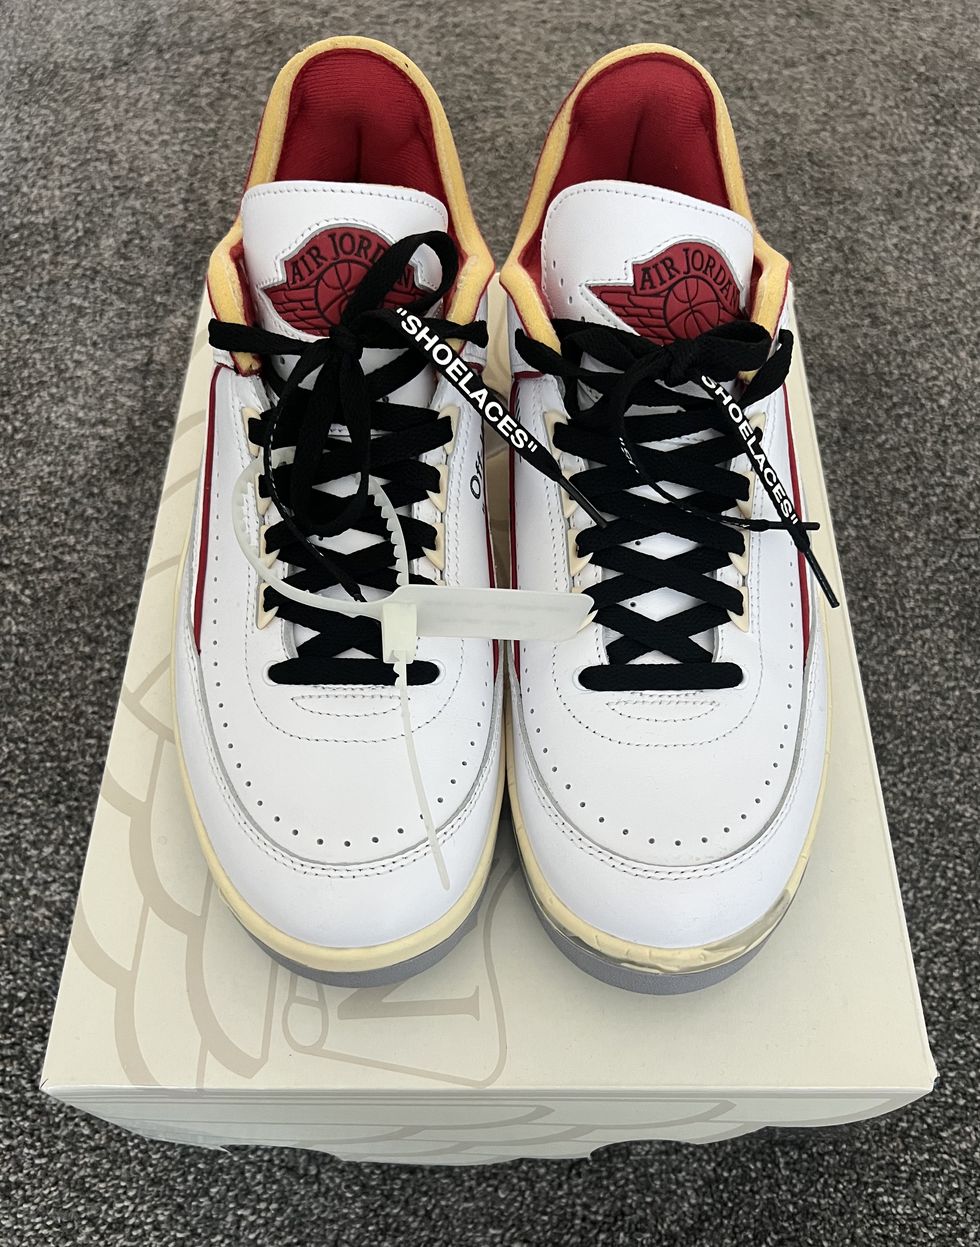 the author’s freshly repellent coated off white x nike air jordan 2s